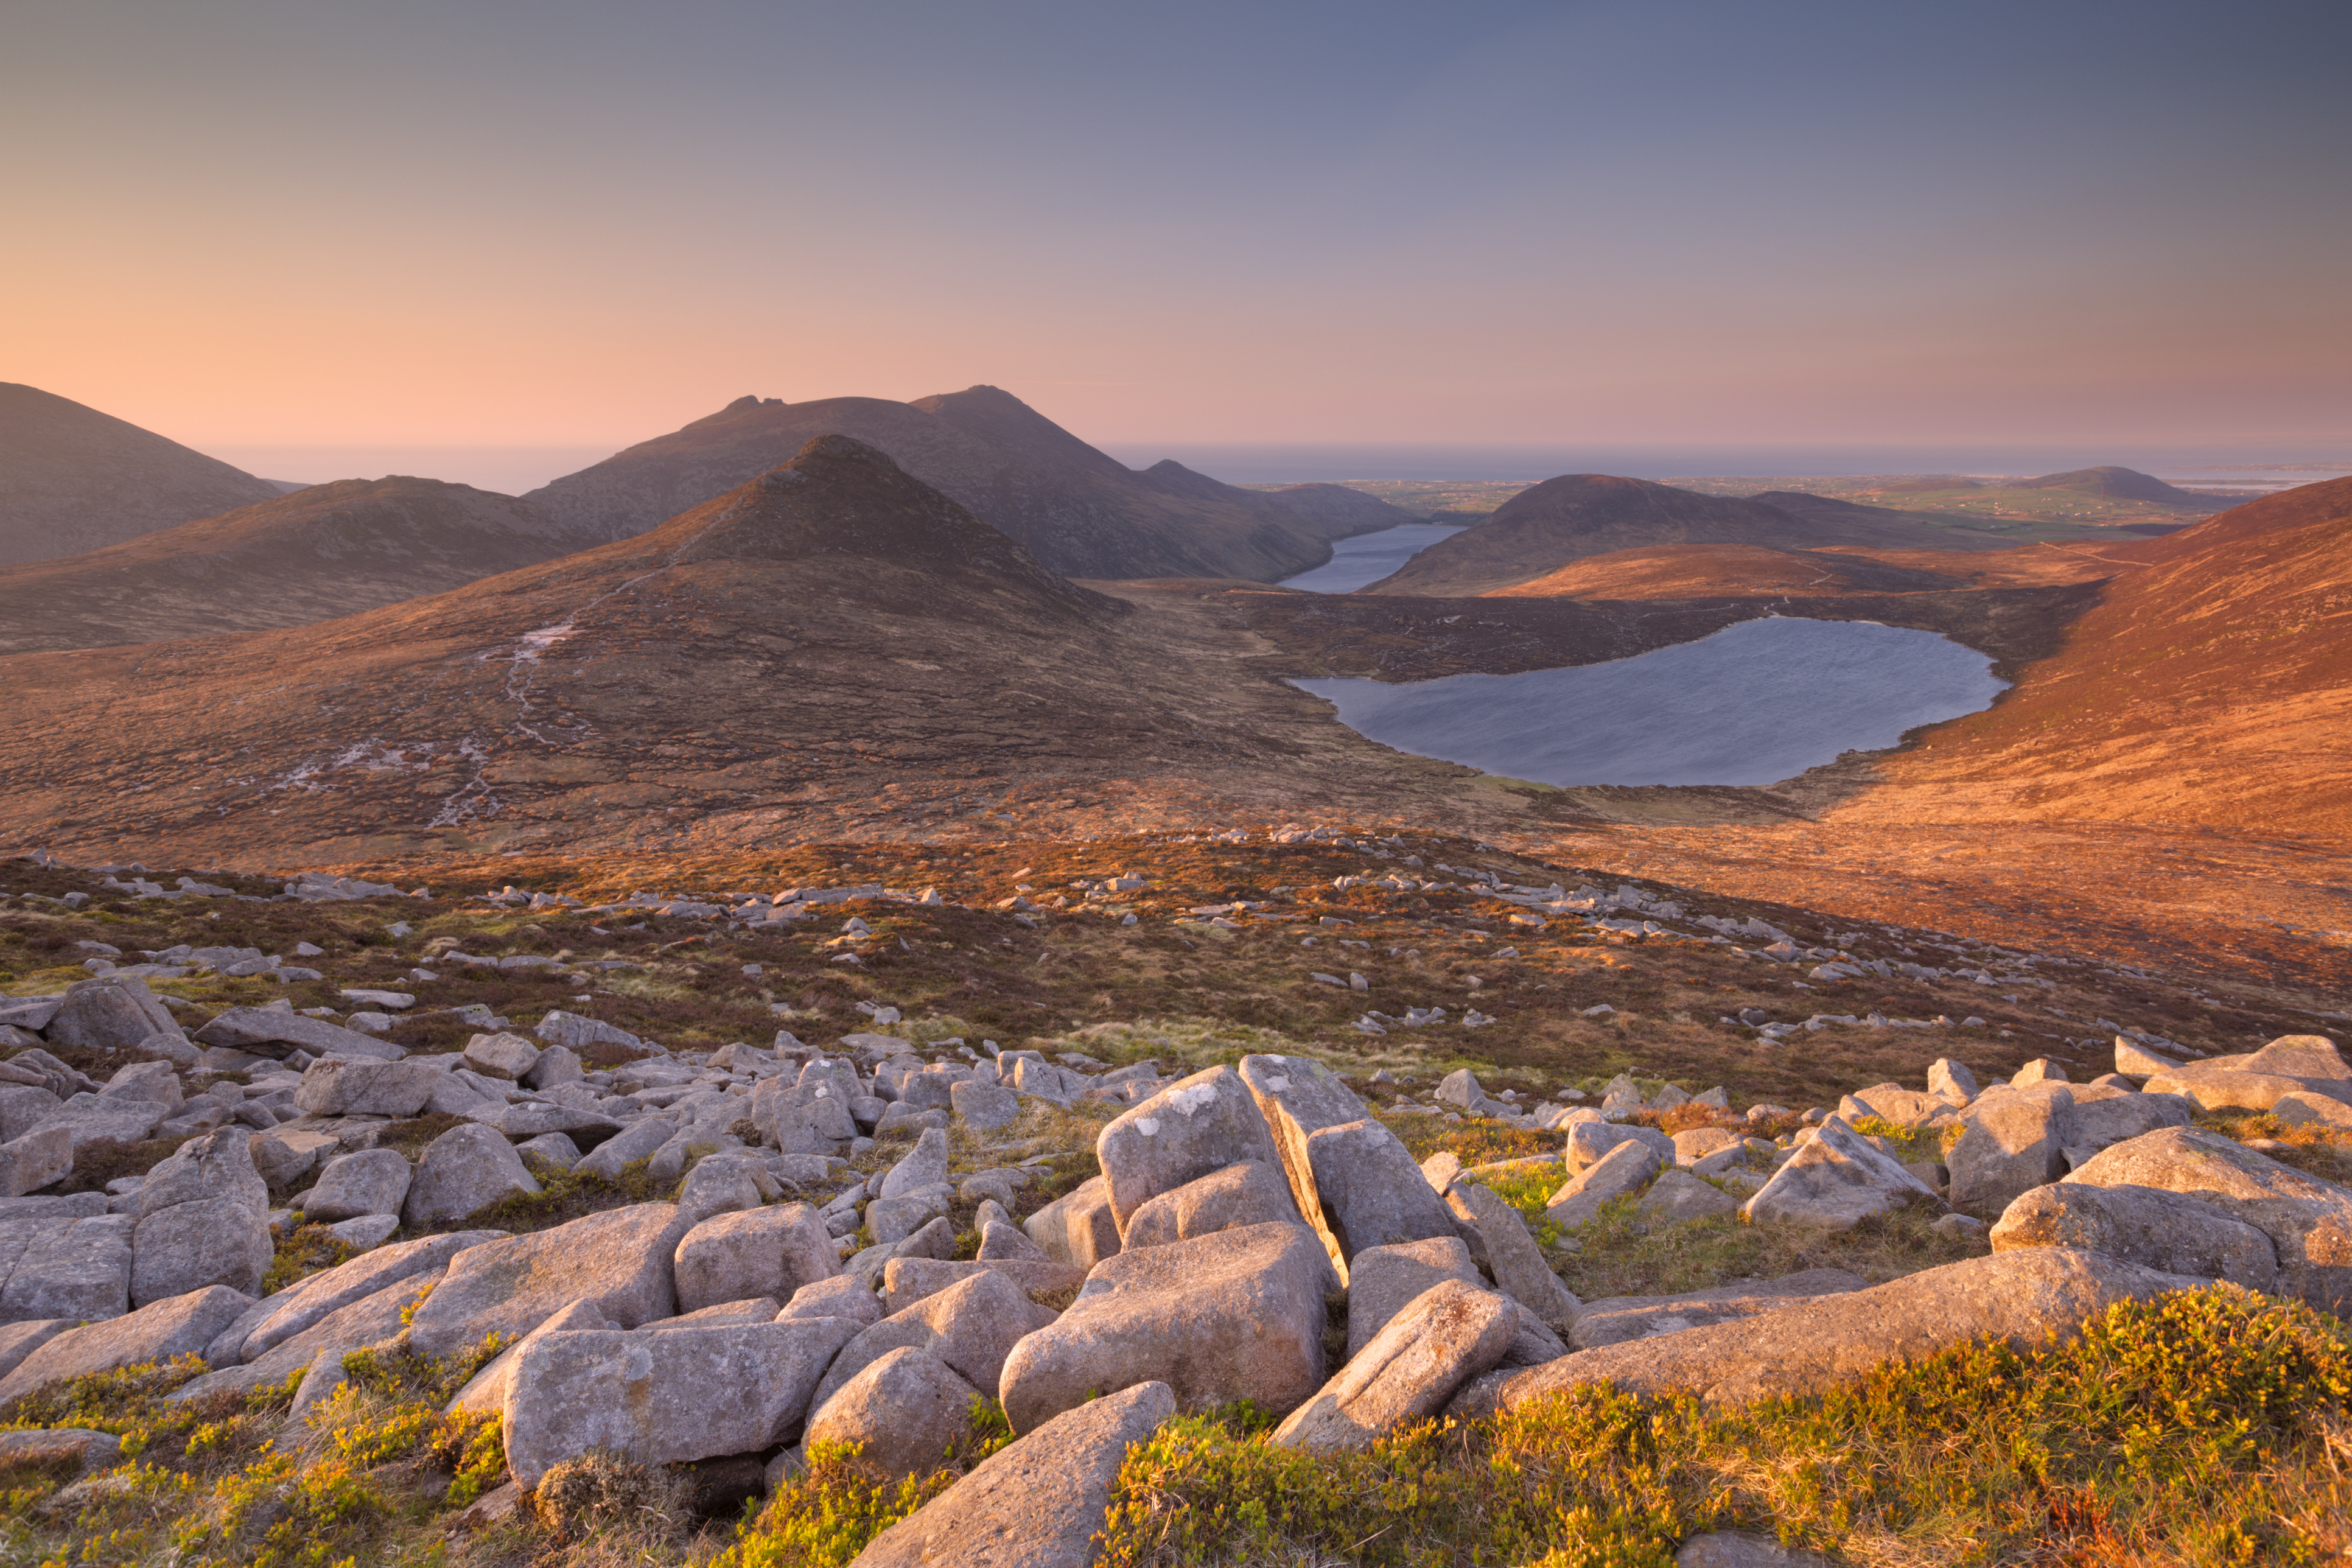 The Mournes through time - Environmental change and cultural heritage